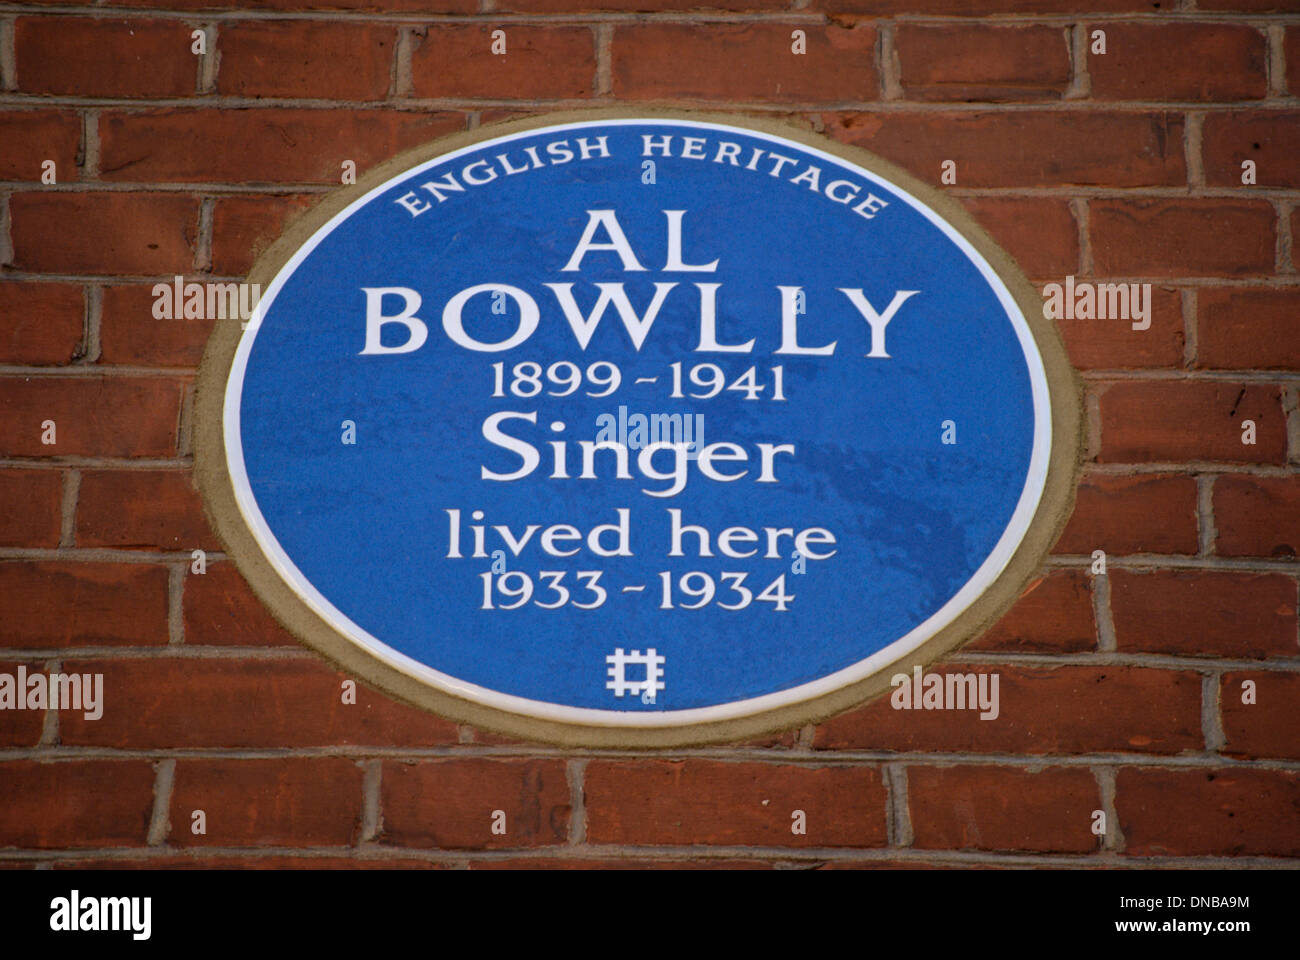 english heritage blue plaque marking a 1930s home of singer al bowlly, charing cross road, london, england Stock Photo